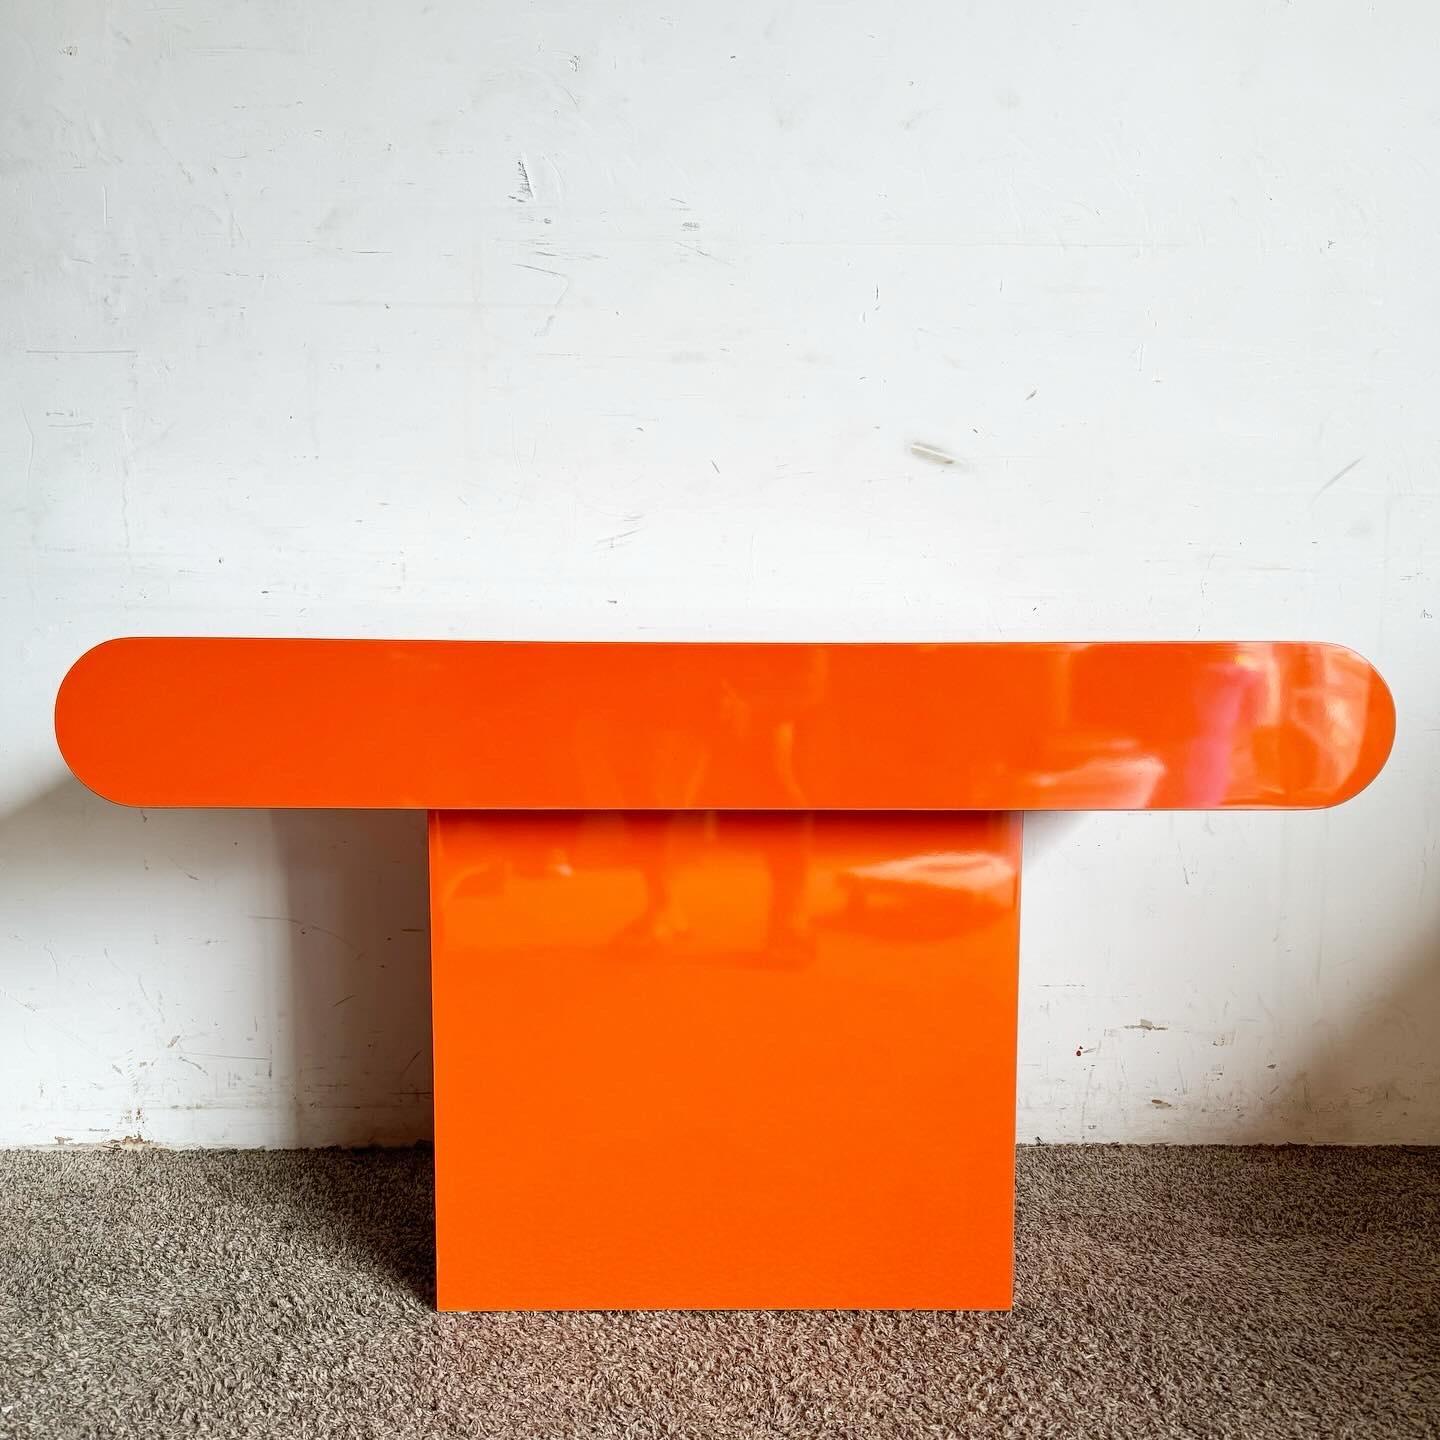 Elevate your space with the Postmodern Orange Lacquer Laminate Bullnose Console Table, a vibrant addition that combines bold color with sleek design. Its minimalist aesthetic and striking orange finish make it a perfect statement piece for any